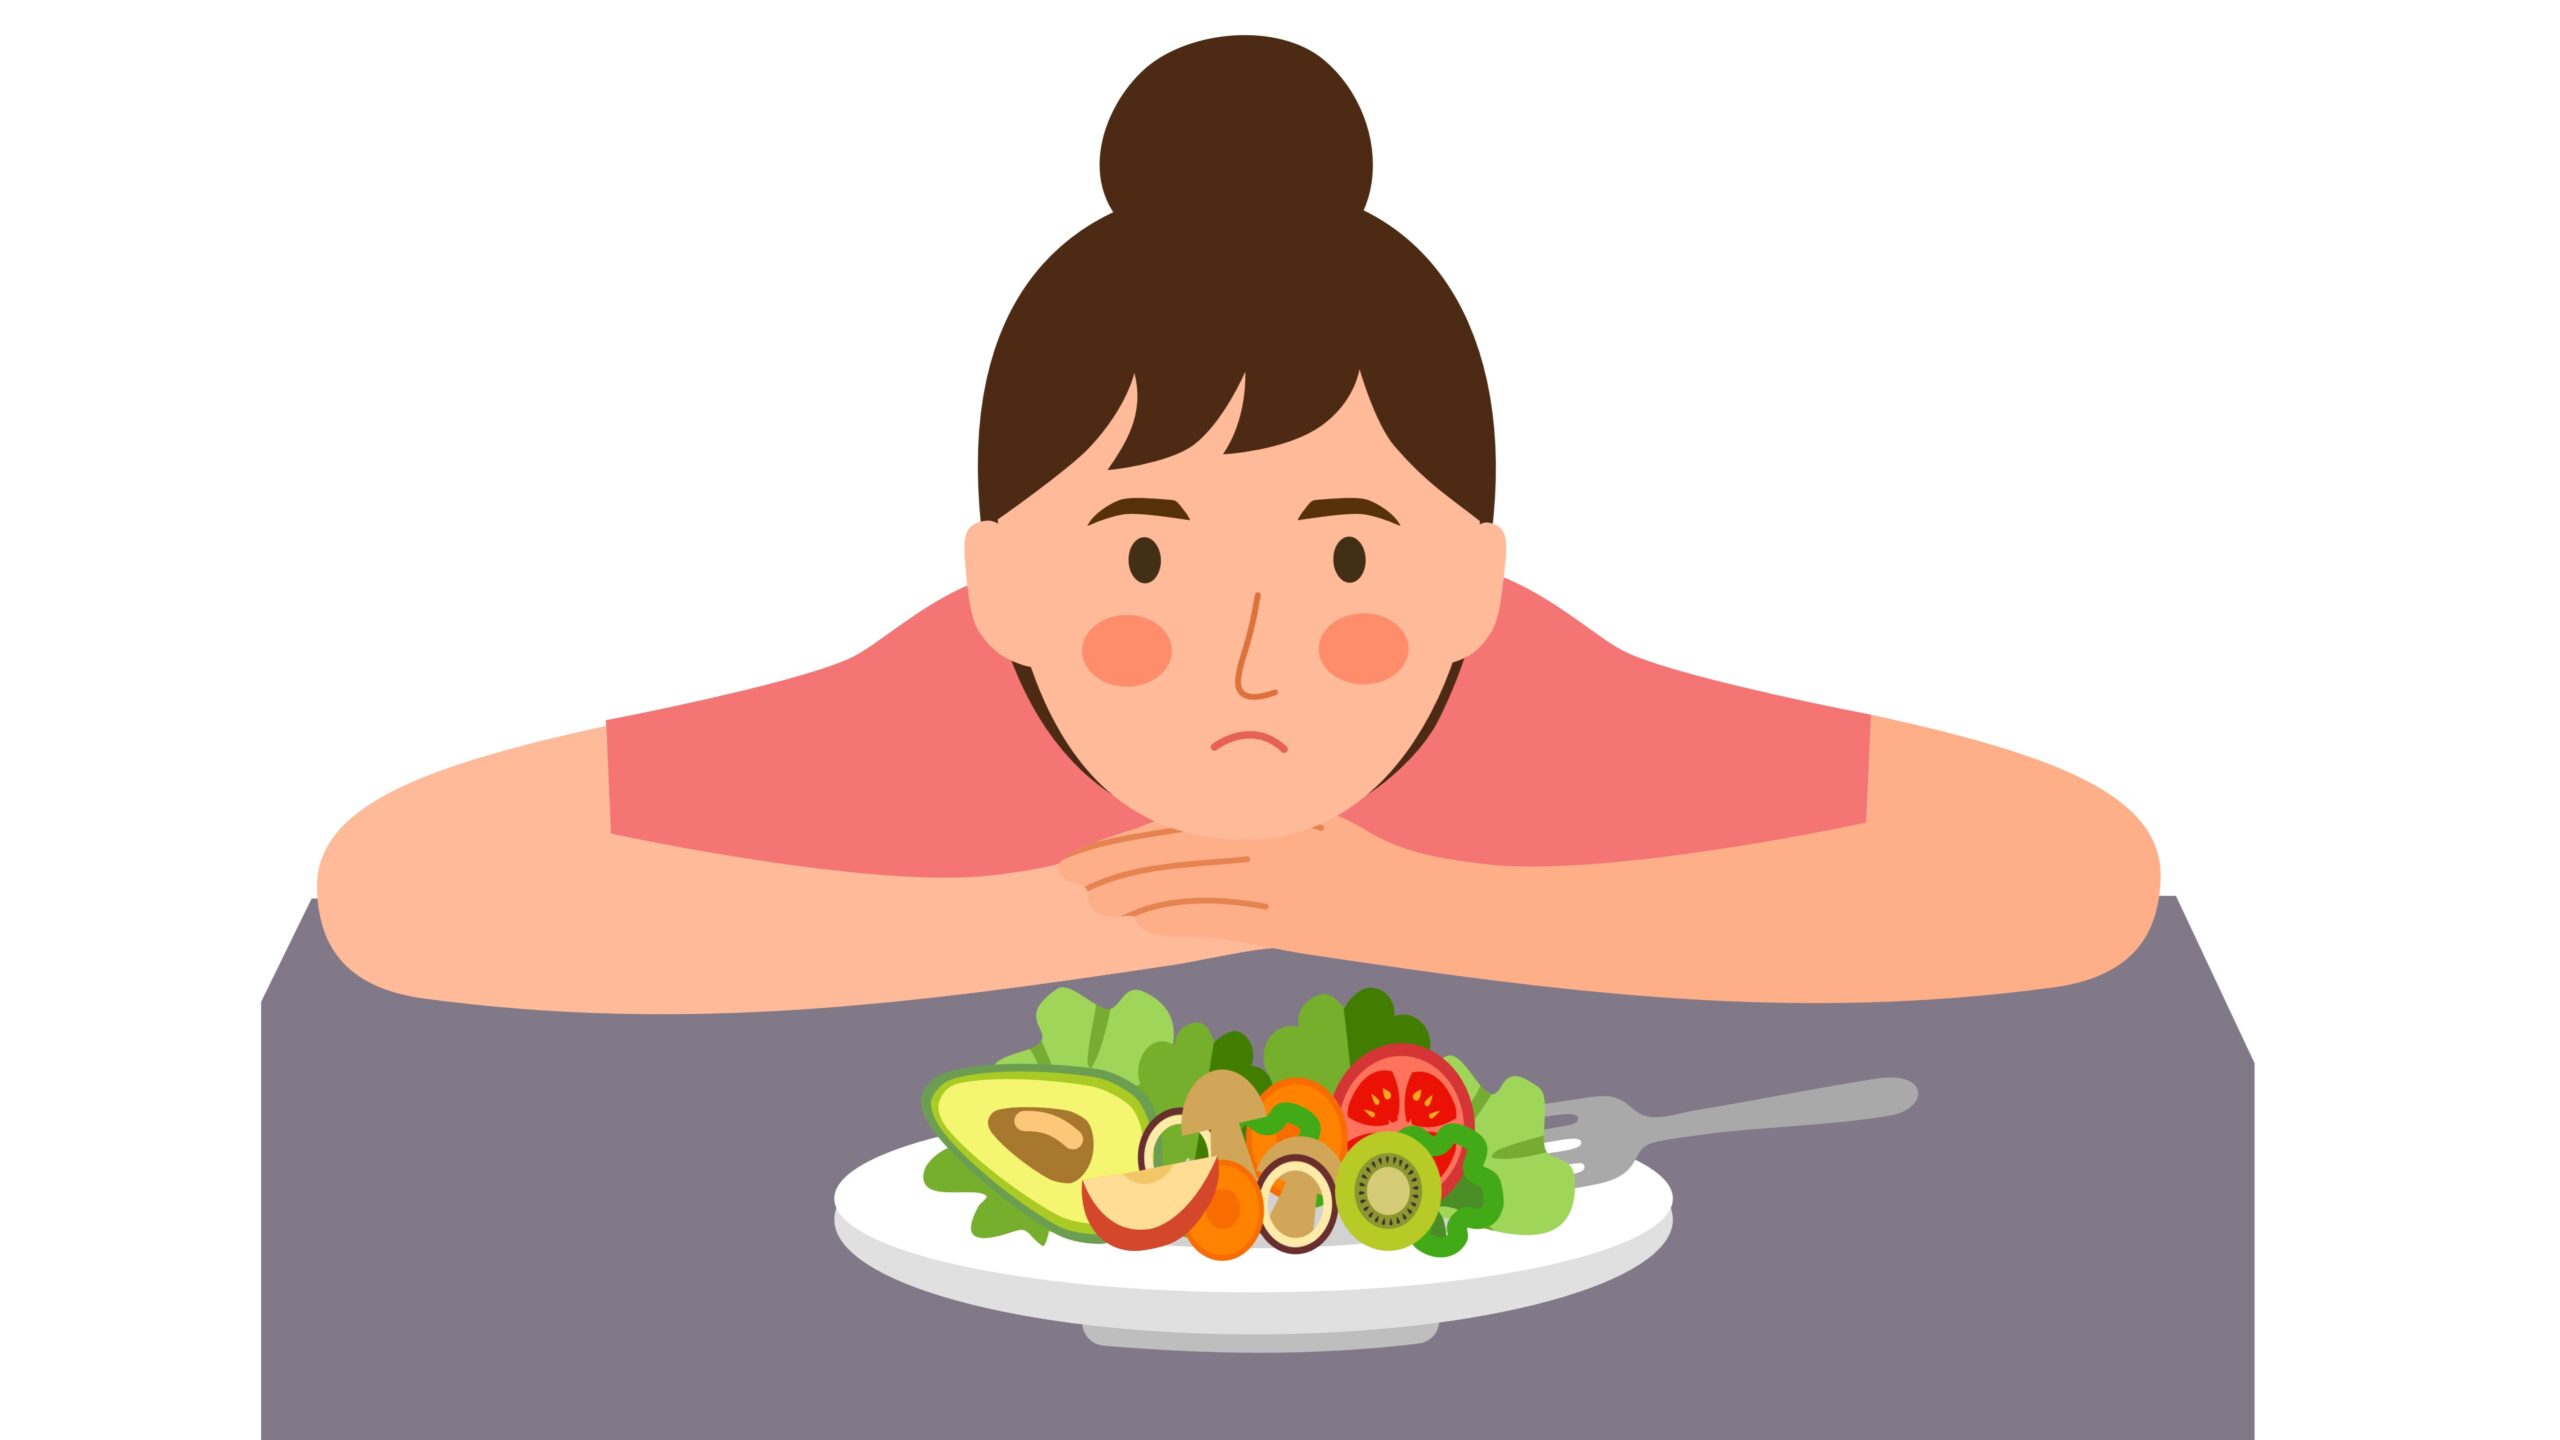 An illustration of a woman sitting at a table, with her head resting on her forearms as she looks apprehensively at a plate of vegetables before her.